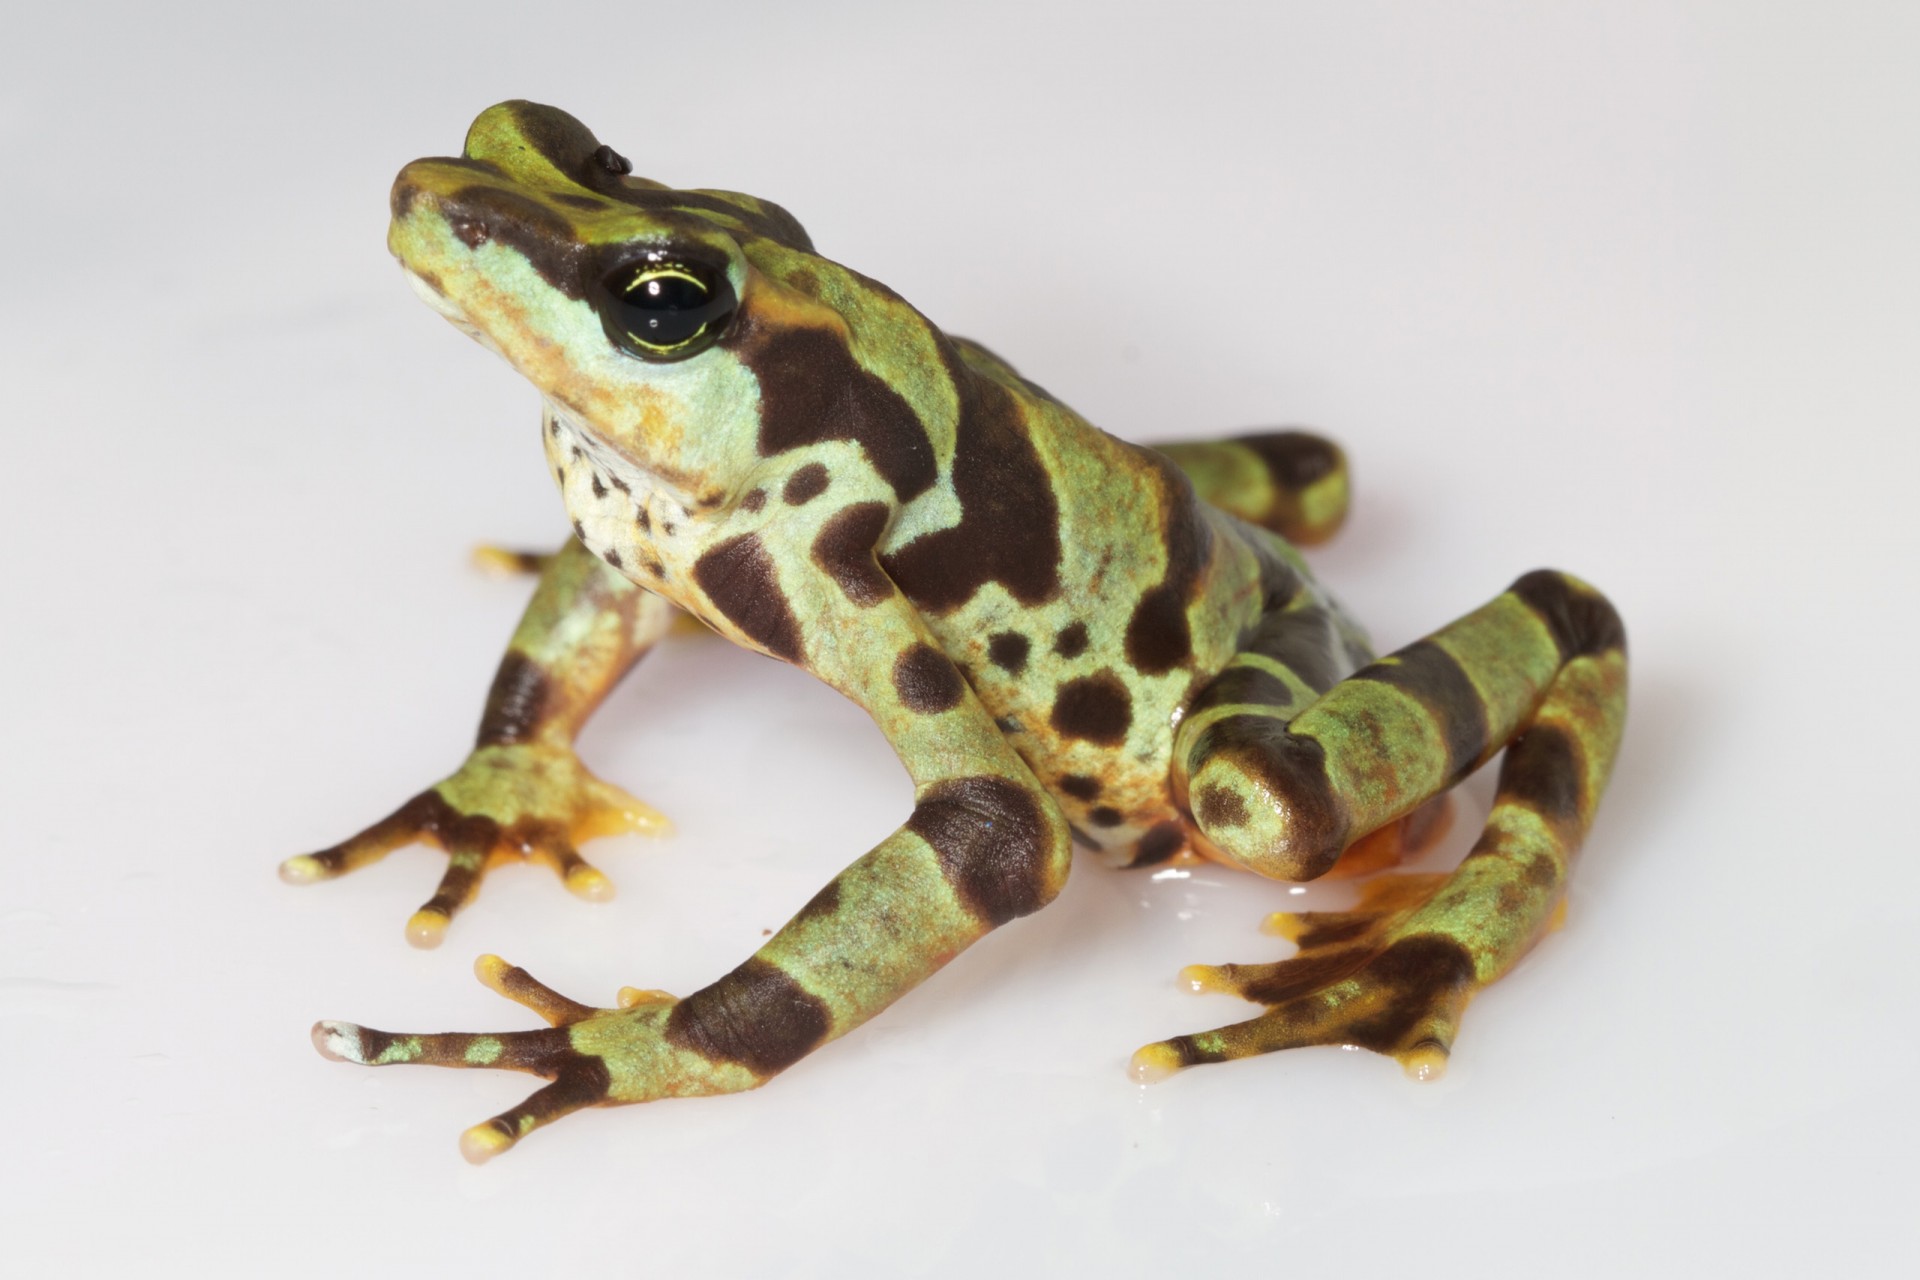 This Panamanian frog demonstrates a very wide range of color patters, thus its name, Atelopus varius